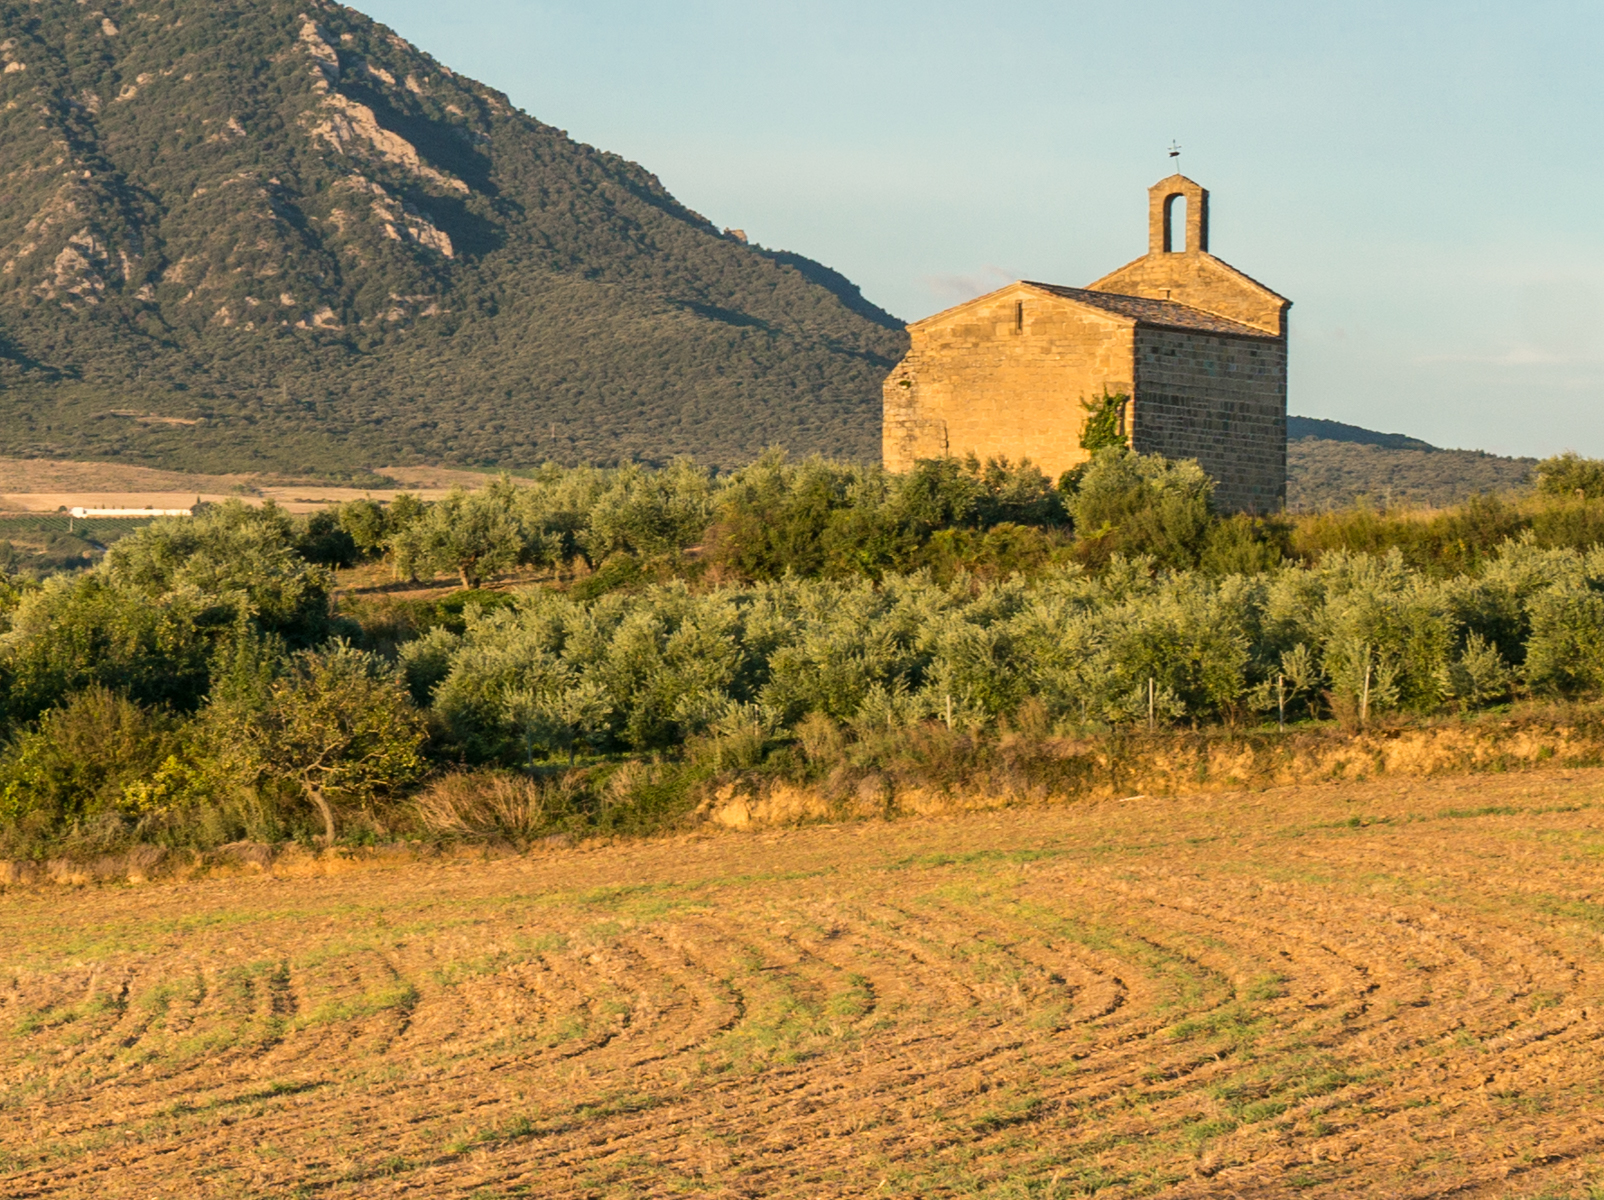 Barn in agricultural field viewed at early morning from Camino west of Villatuerta, Spain | Photo by Mike Hudak